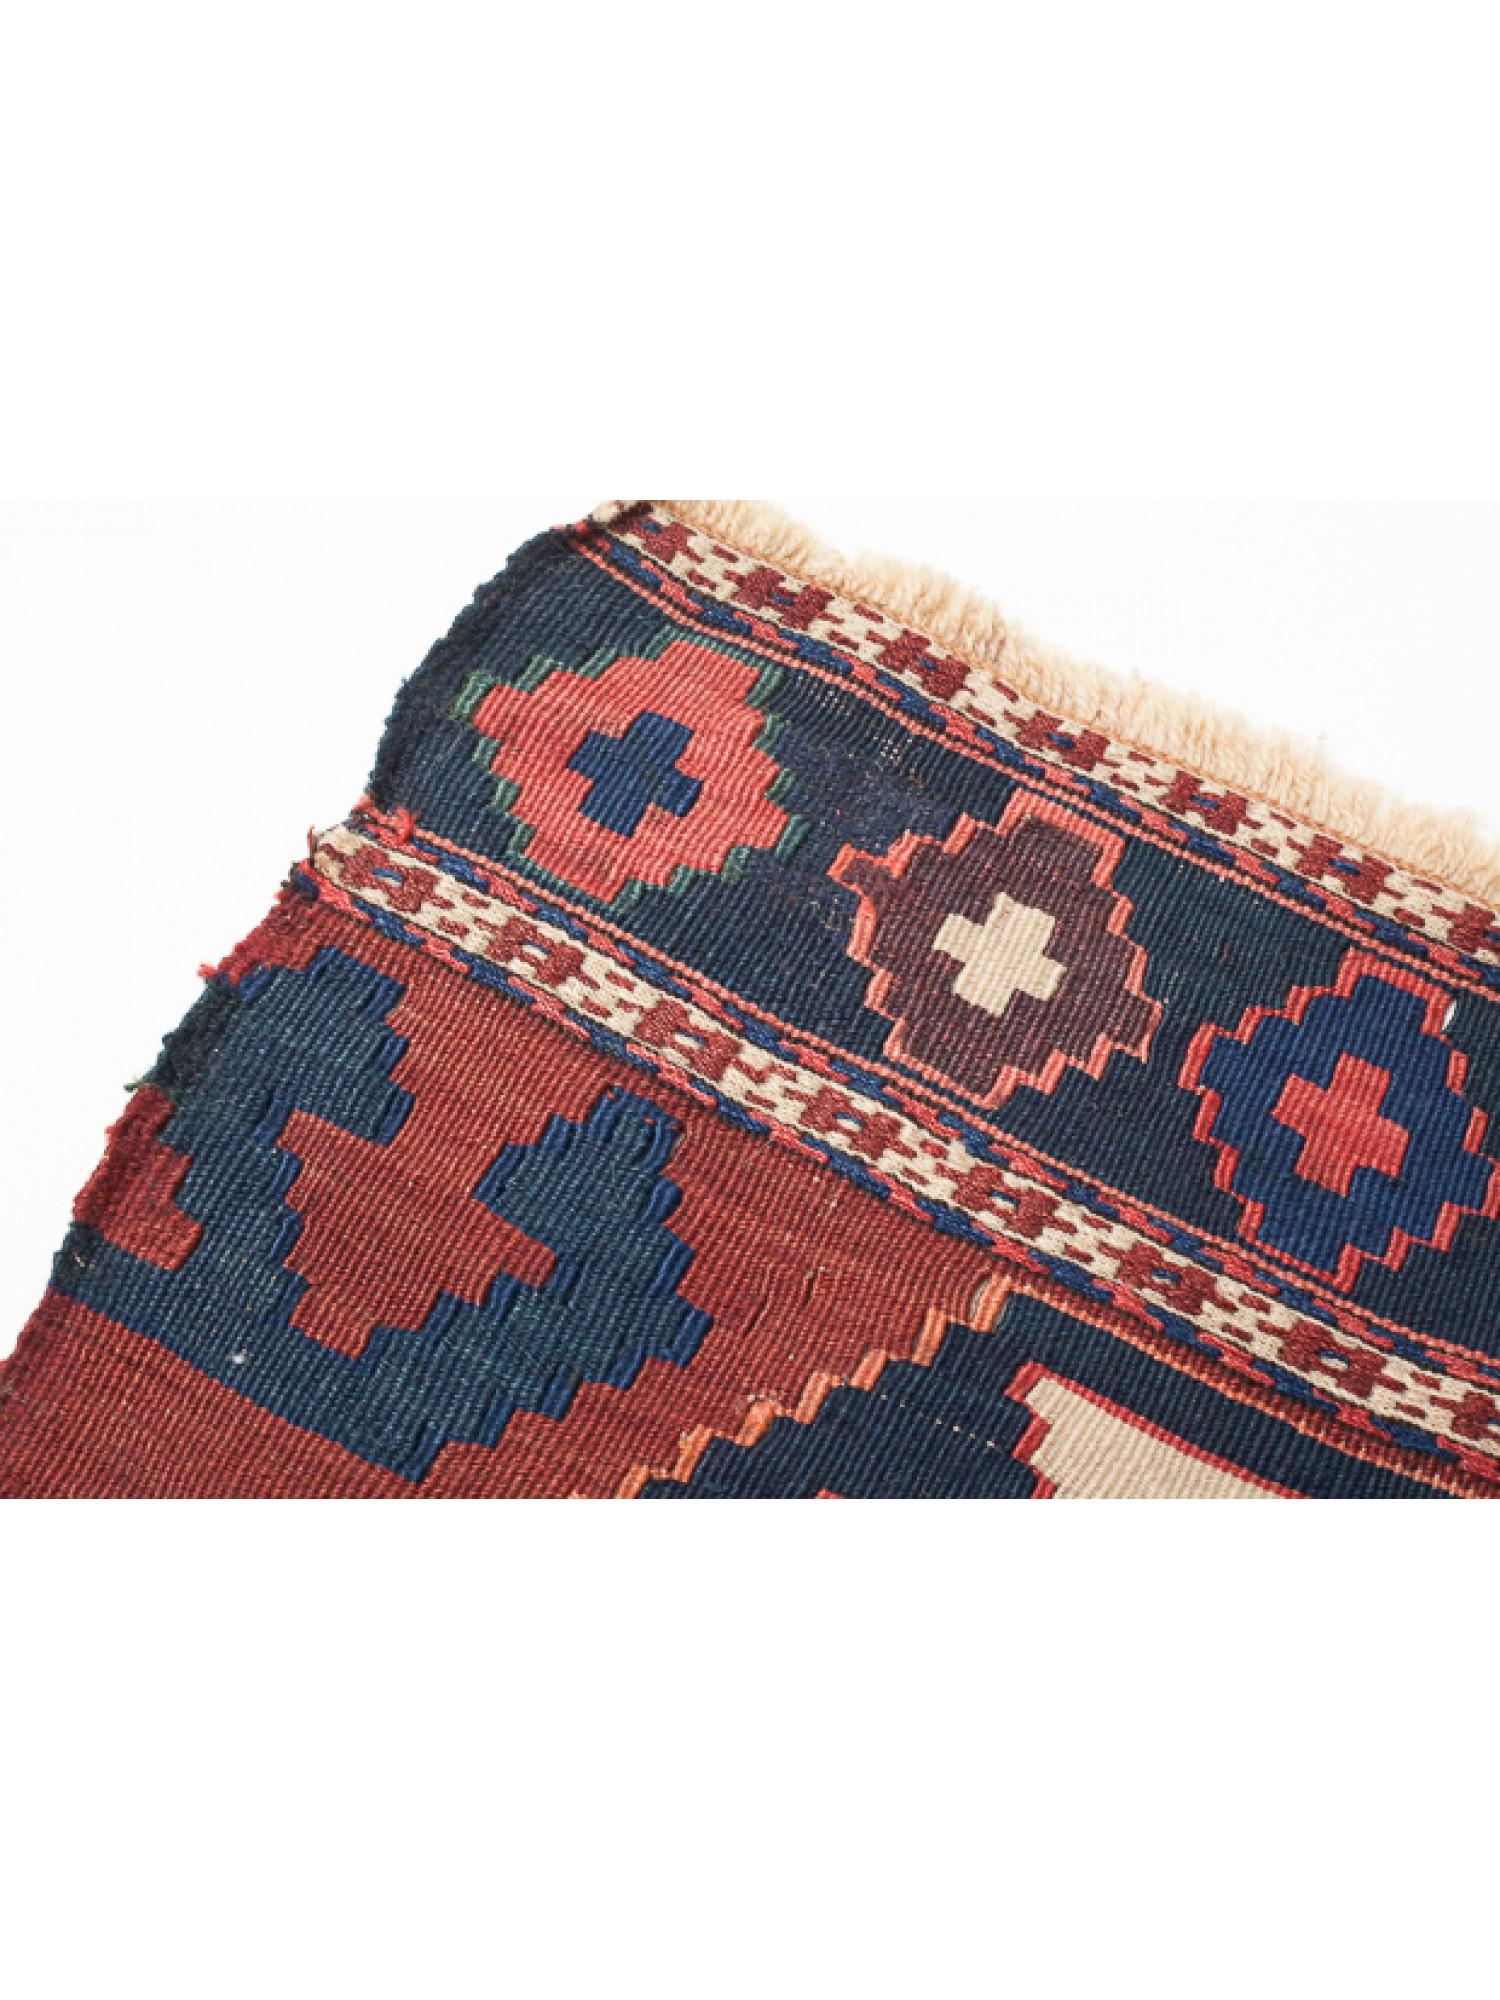 Antique Early 20th Century Caucasian Kilim Woven Cradle Part, Natural Dyed In Good Condition For Sale In Tokyo, JP